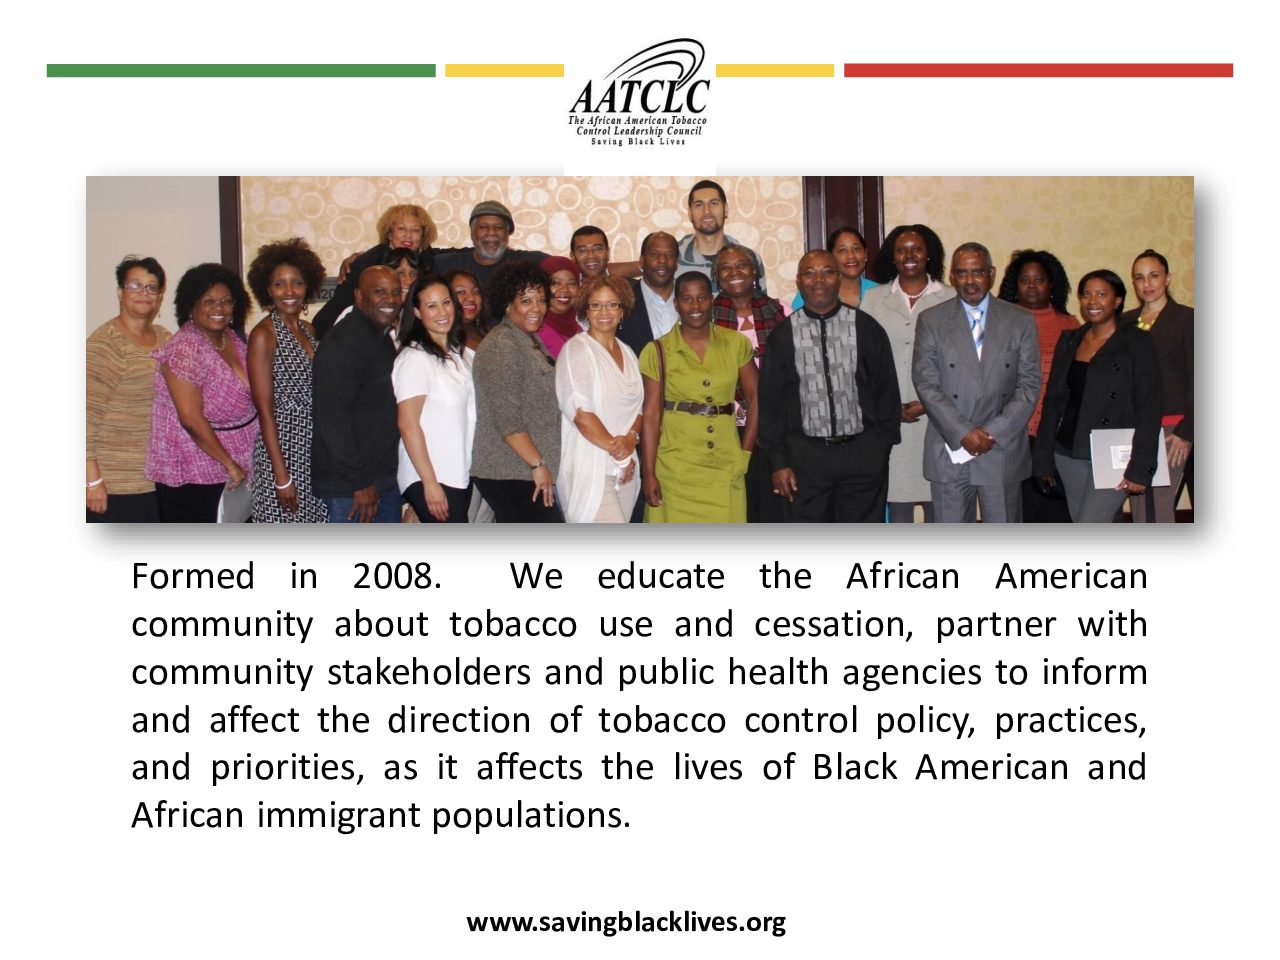 African American Tobacco Control Leadership Council (AATCLC) Policy Platform Presentation, September 02, 2020